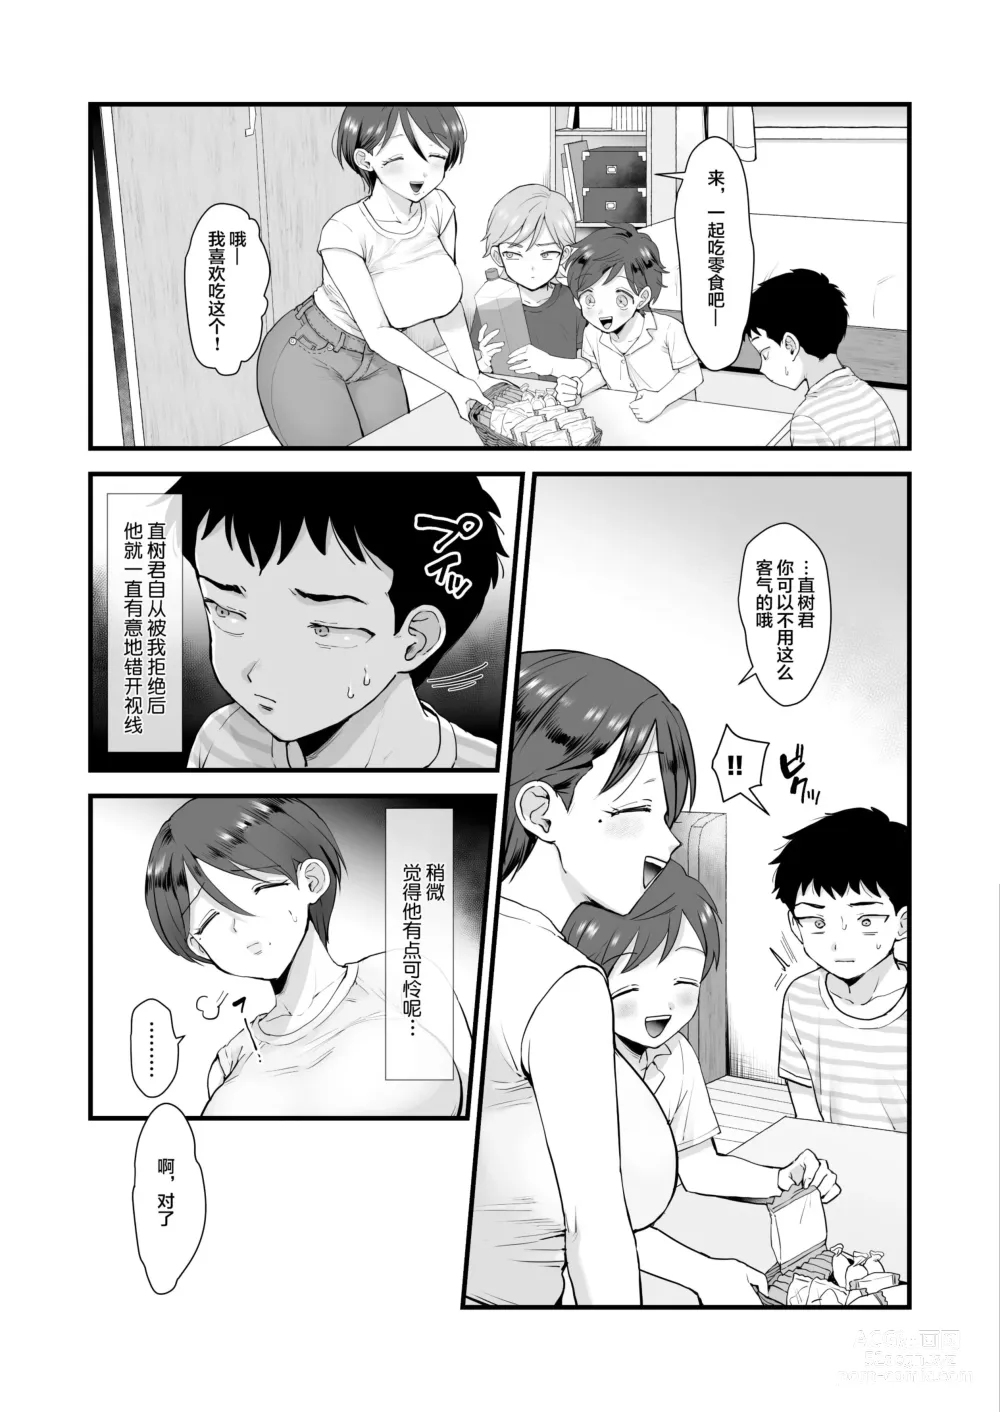 Page 6 of doujinshi sinistra (Eda)] Continued: A laid-back big-breasted mom. [Chinese translation